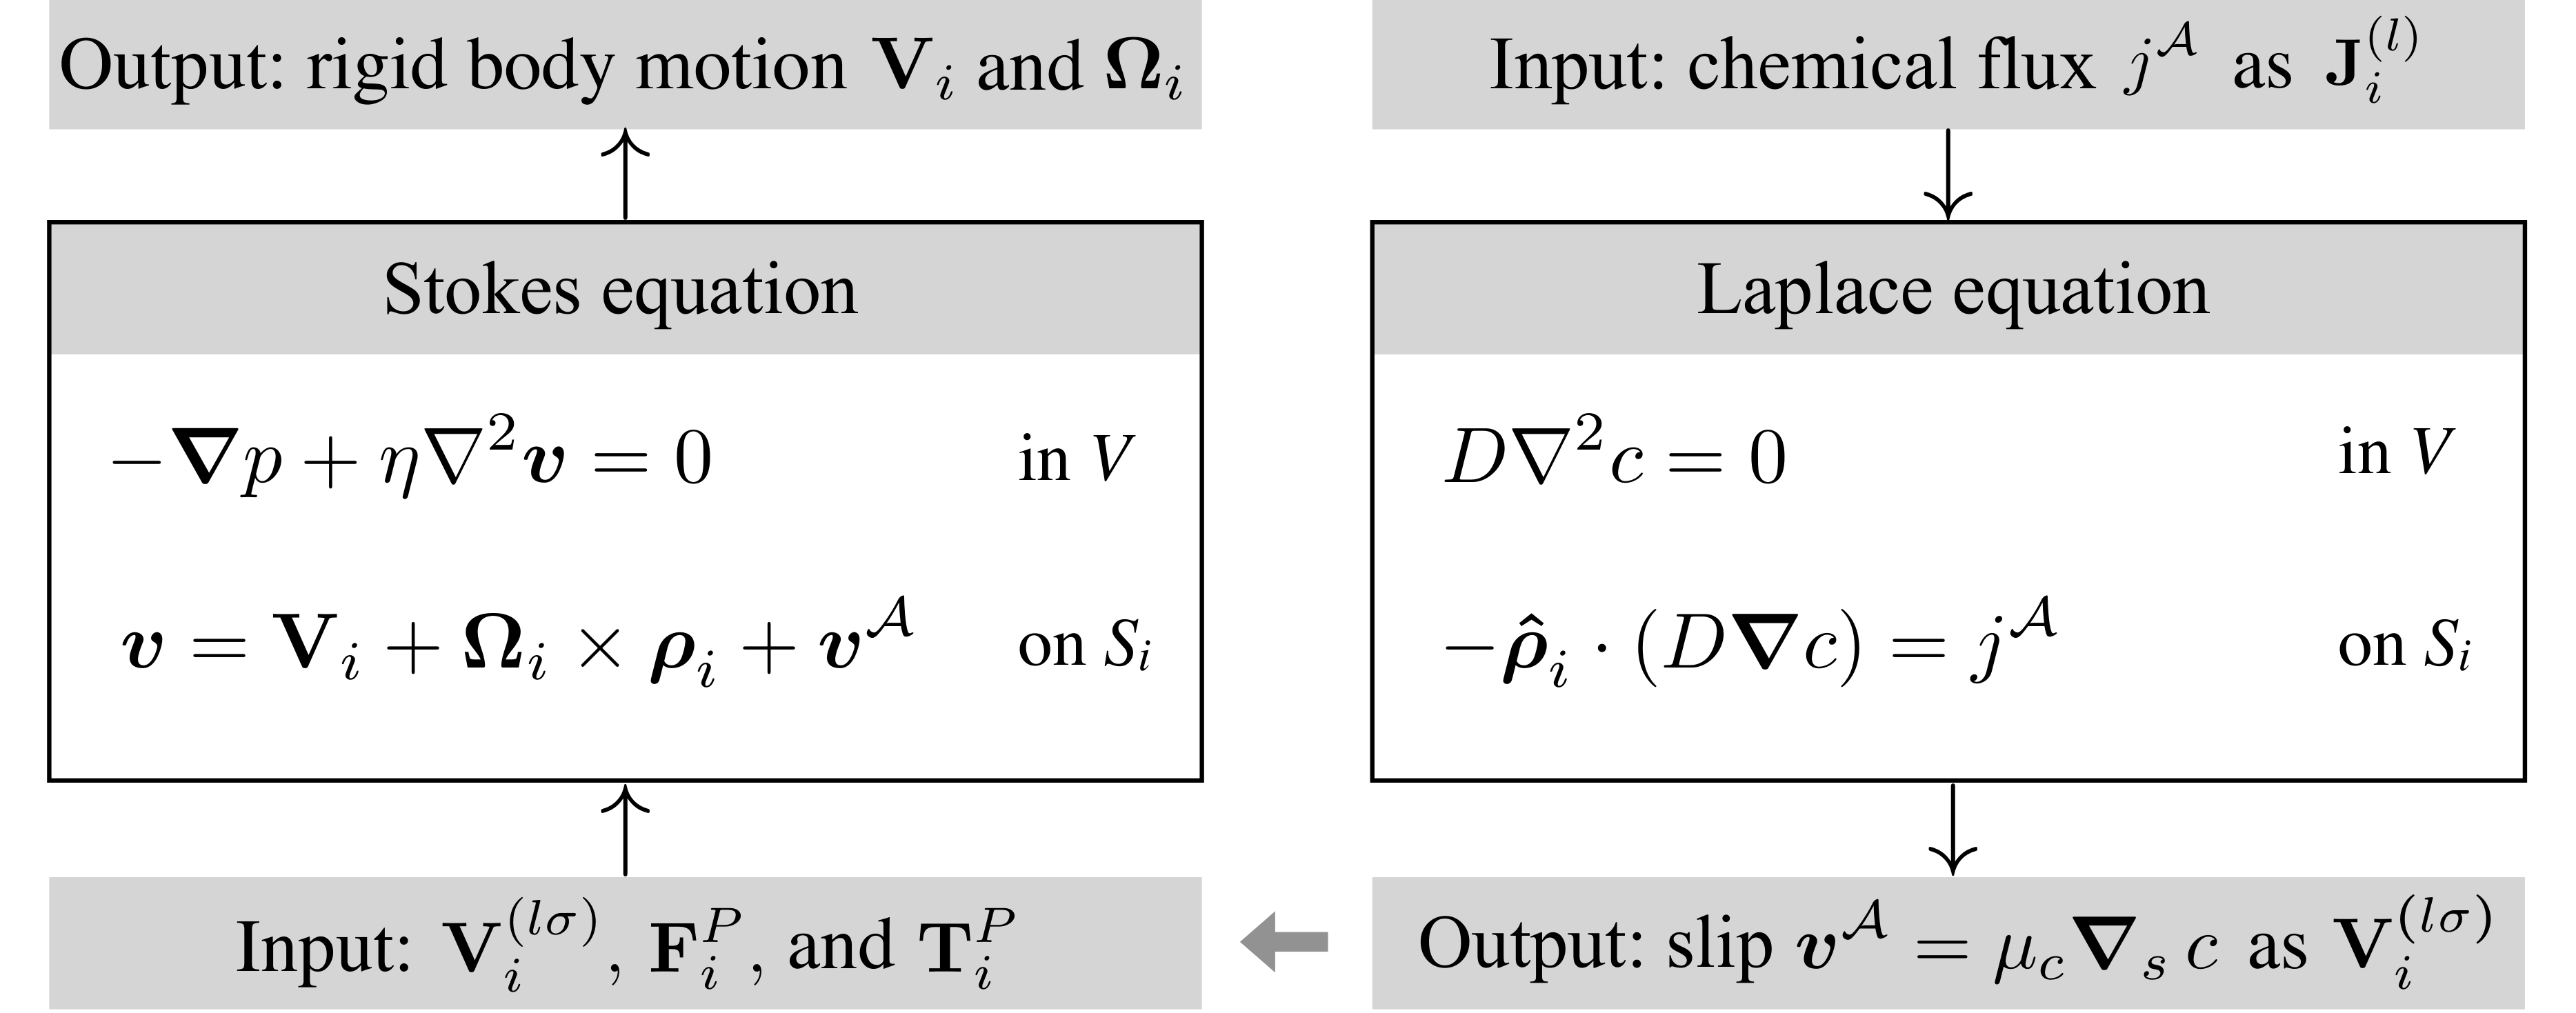 Input and output structure of PyStokes to determine the hydrodynamic and phoretic interactions between active particles in a three-dimensional domain $V$. The equations are coupled by active boundary conditions on the surface $S_{i}$ of the particles. Particle indices are $i=1,\ldots,N$ and harmonic indices are $l=1,2,\ldots$ and $\sigma=s,a,t$ (see text). \label{fig:figS}